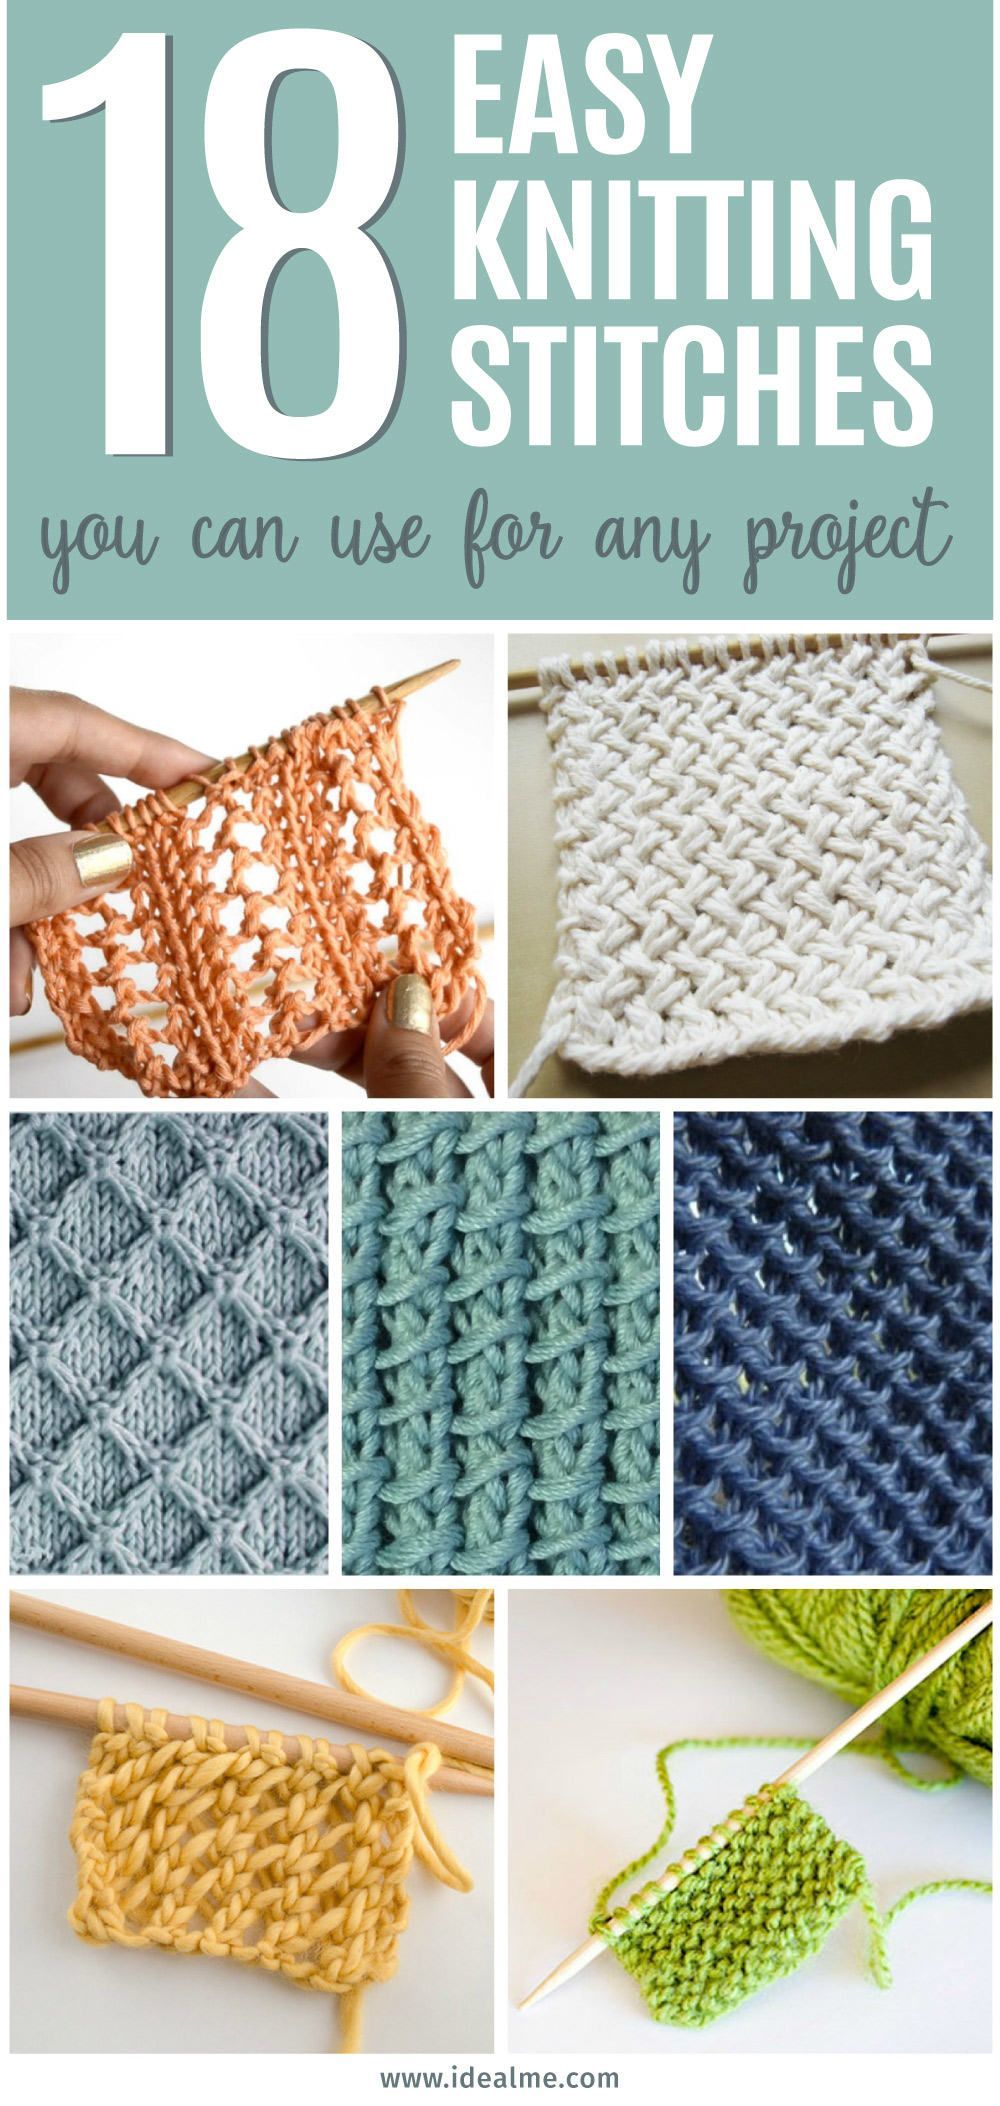 Learning to knit can be completely overwhelming but our list of 18 easy knitting stitches you can use for any project will have